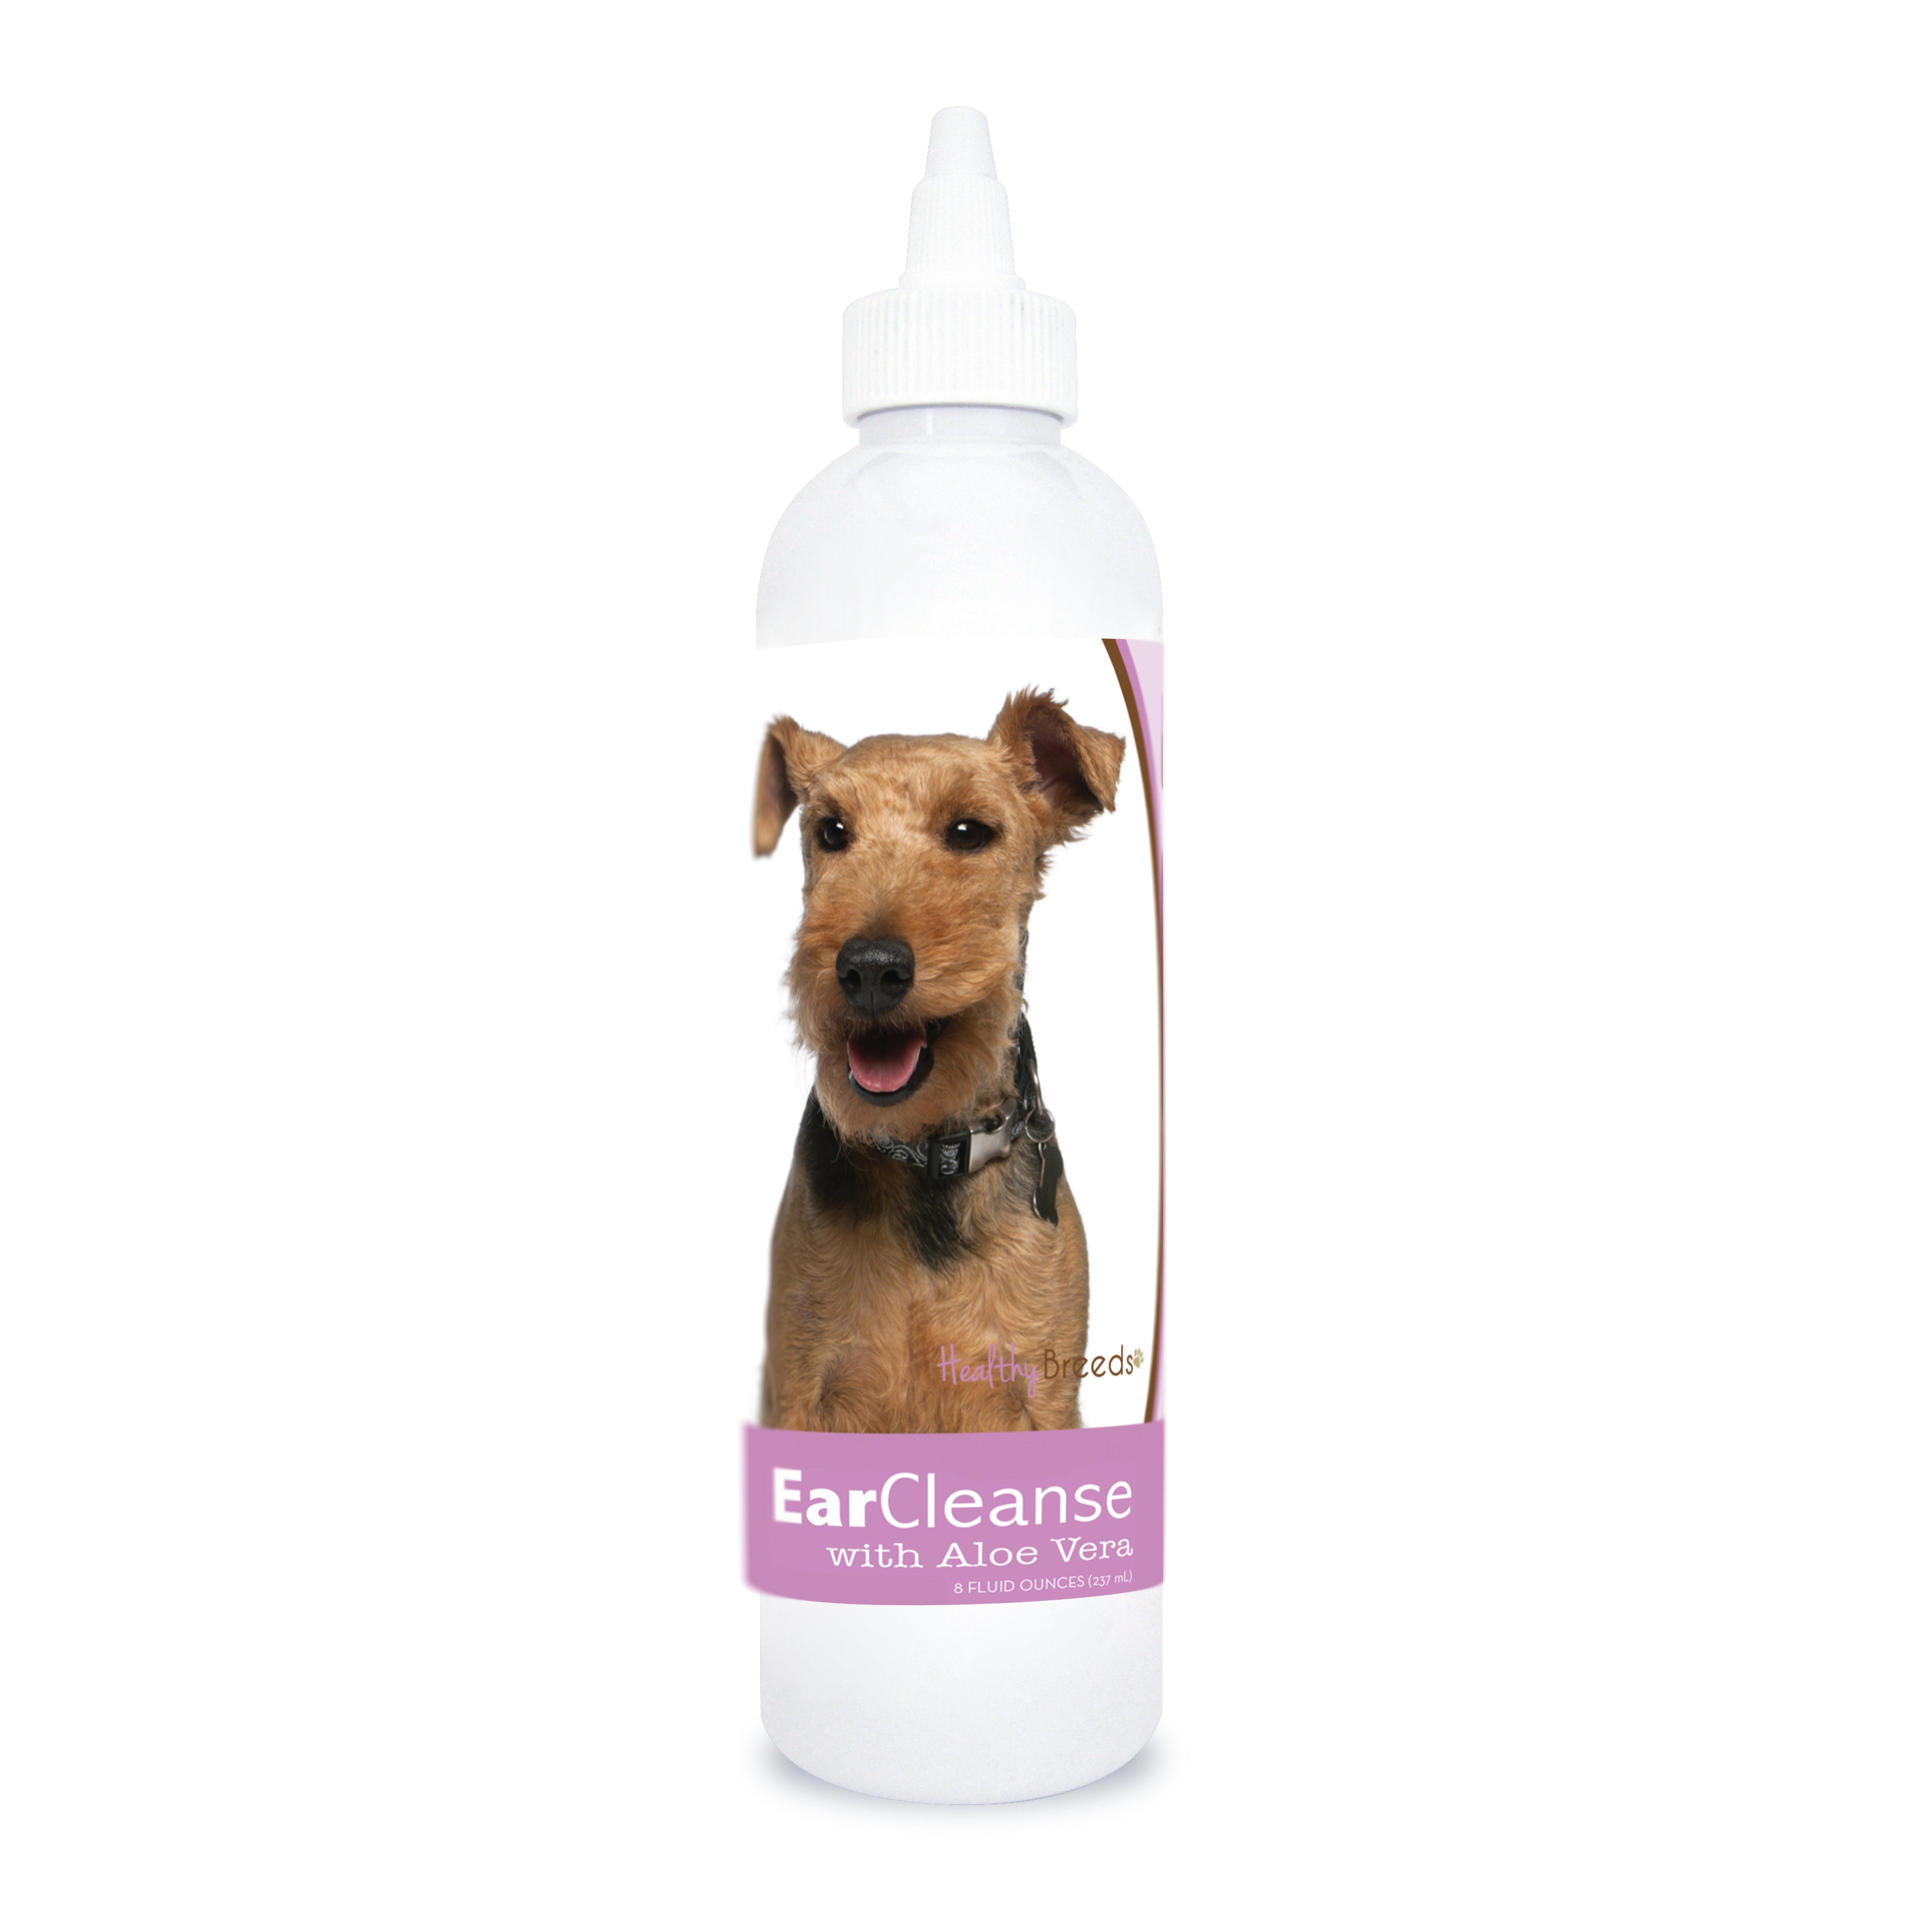 Welsh Terrier Ear Cleanse with Aloe Vera Sweet Pea and Vanilla 8 oz